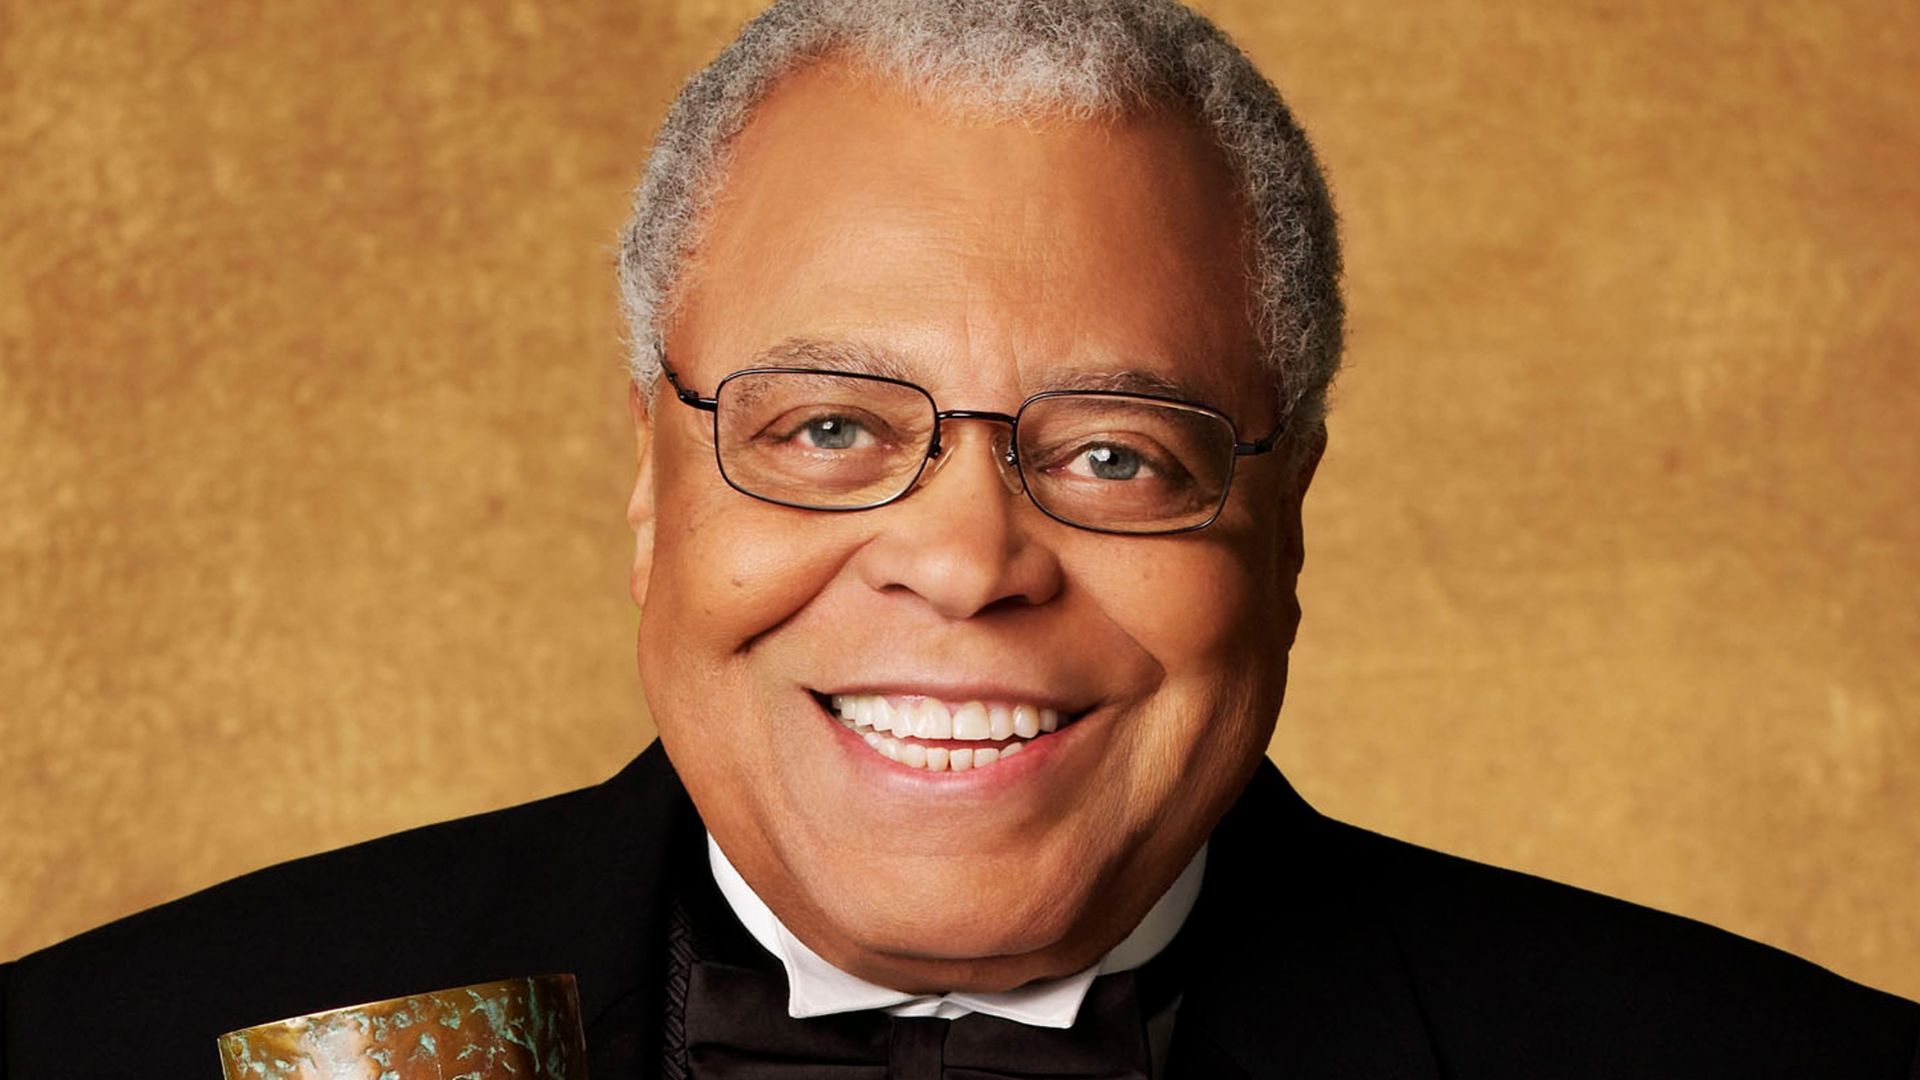 James Earl Jones With A Smiling Face